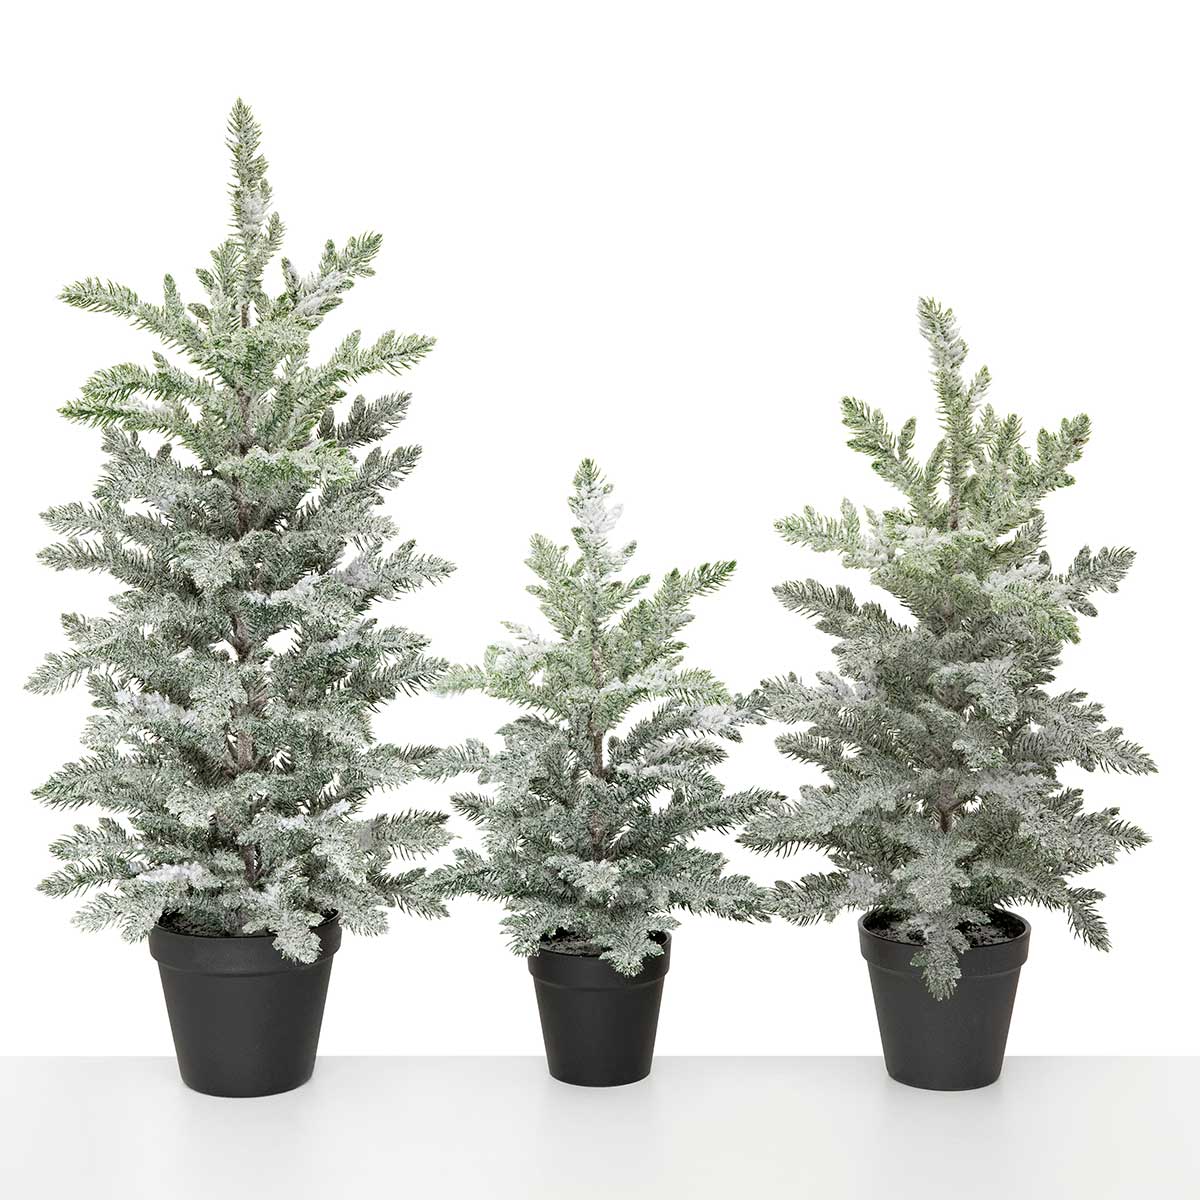 TREE TIDINGS SNOW PINE LARGE 10IN X 24IN IN BLACK POT PLASTIC - Click Image to Close